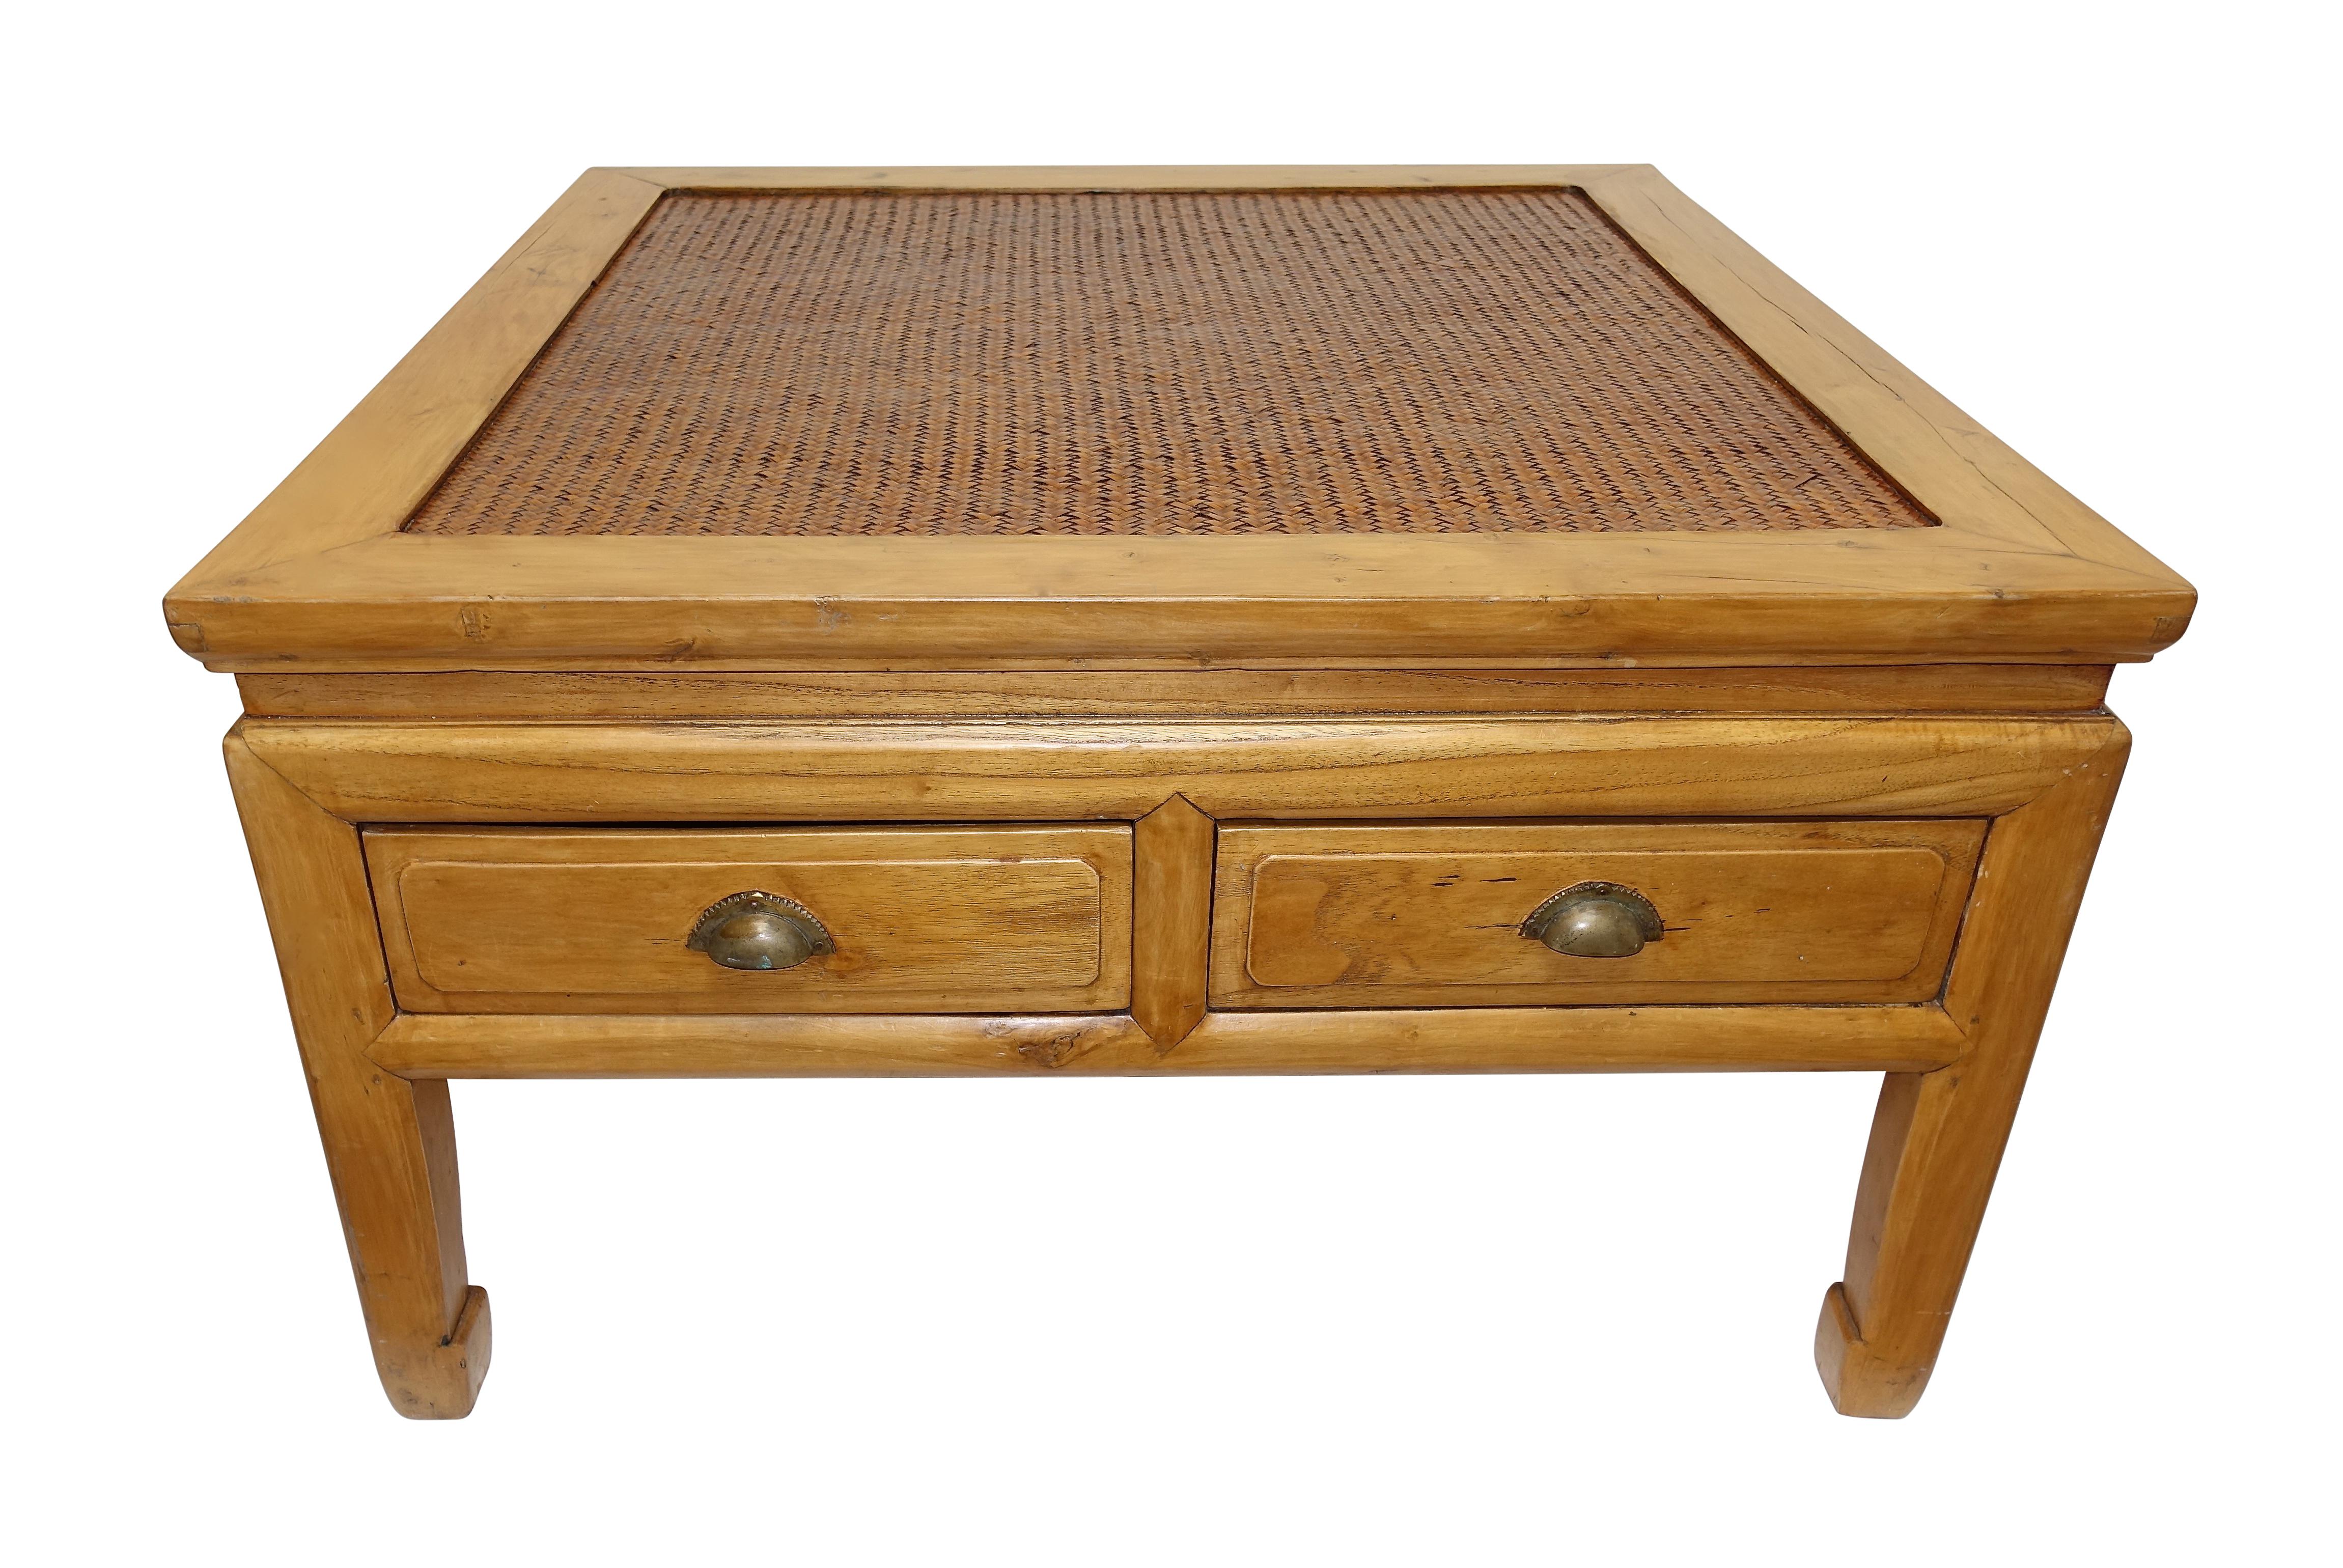 Chinese Low Table with Woven Panel Top In Excellent Condition For Sale In San Francisco, CA